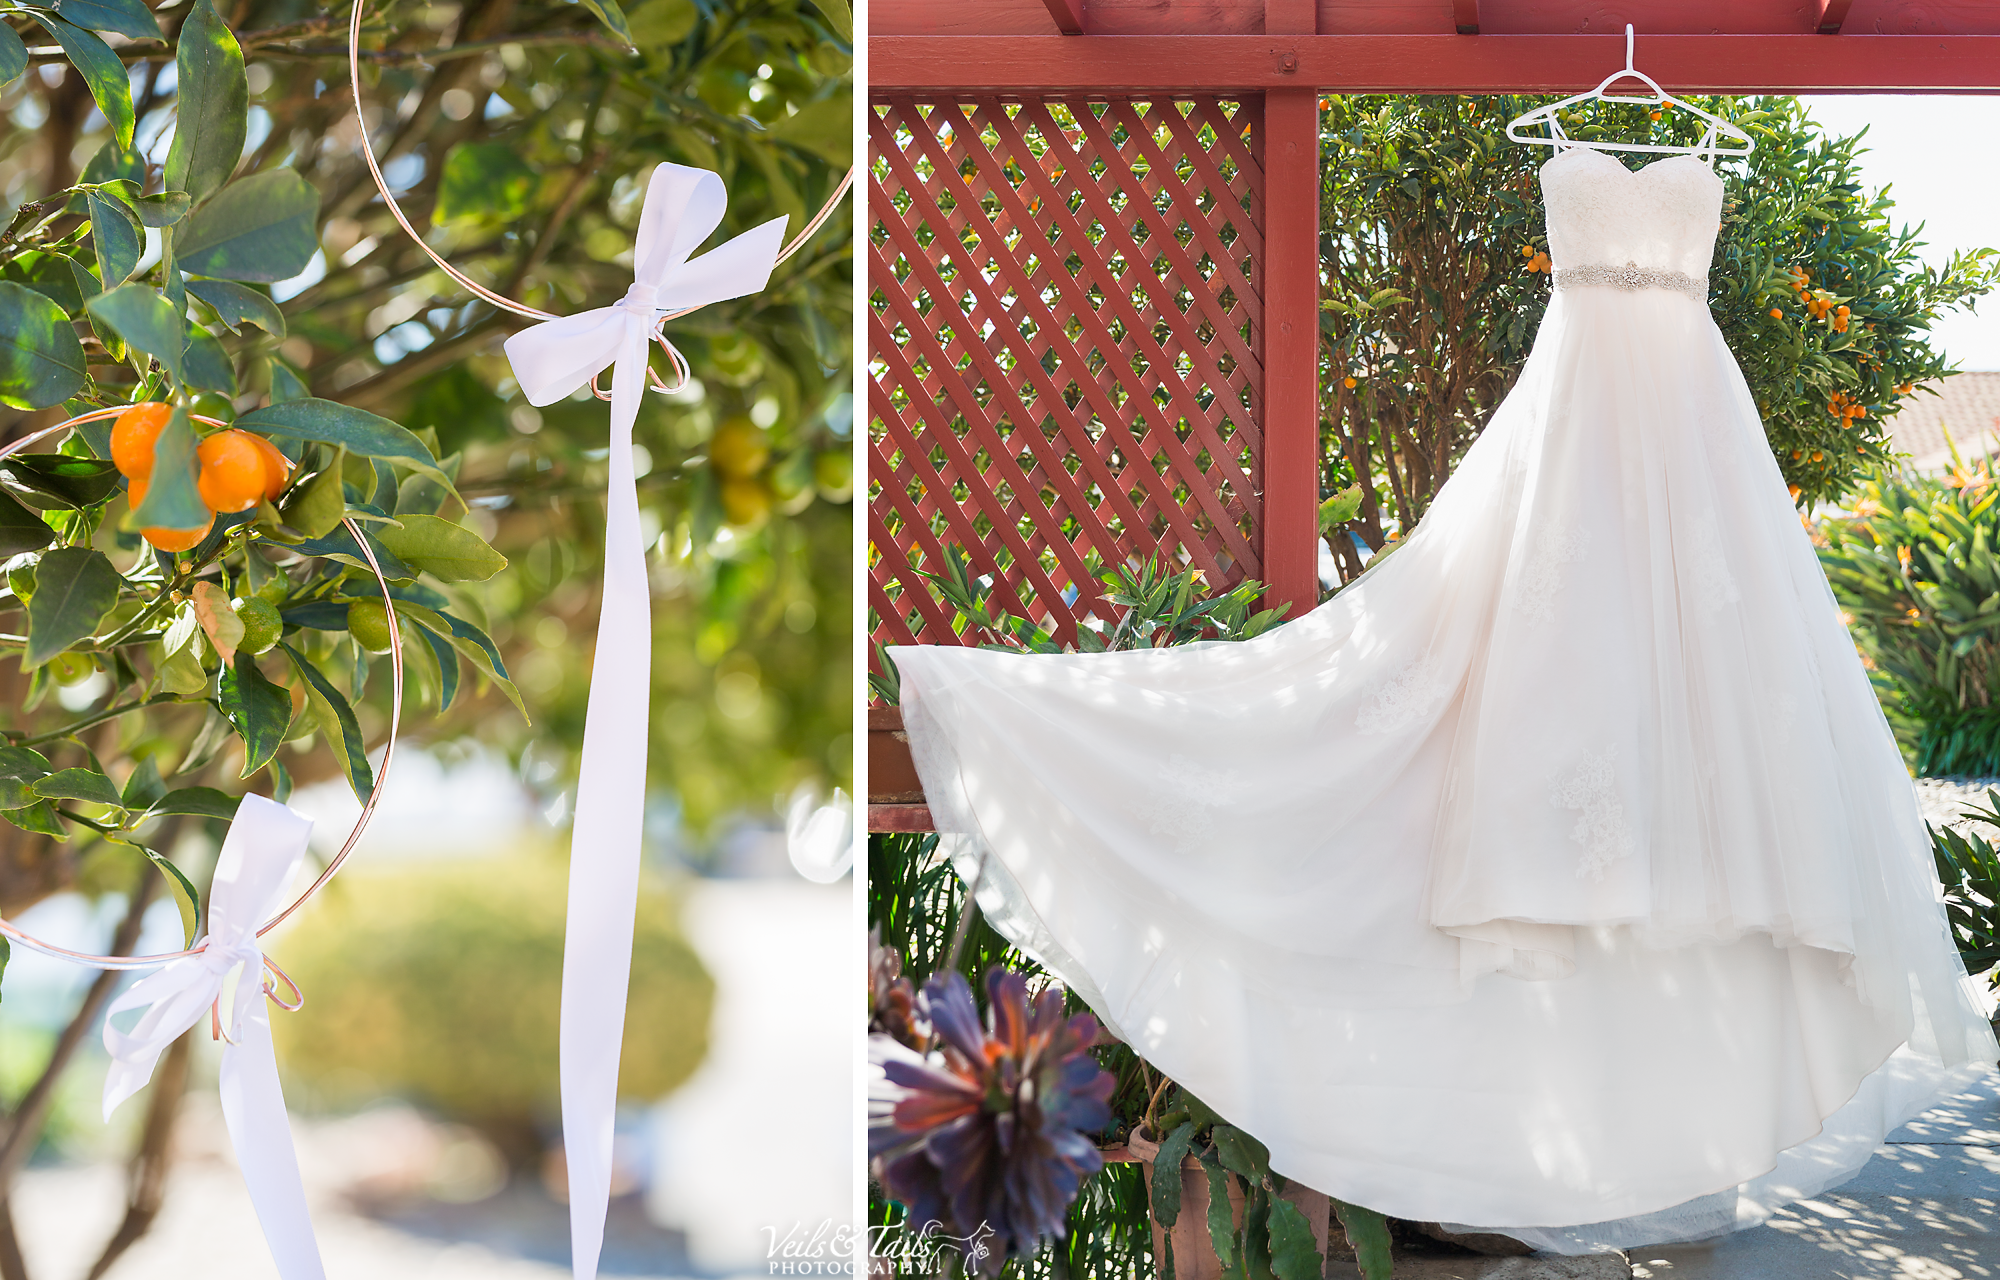 wedding dress hung up on gate with flowers